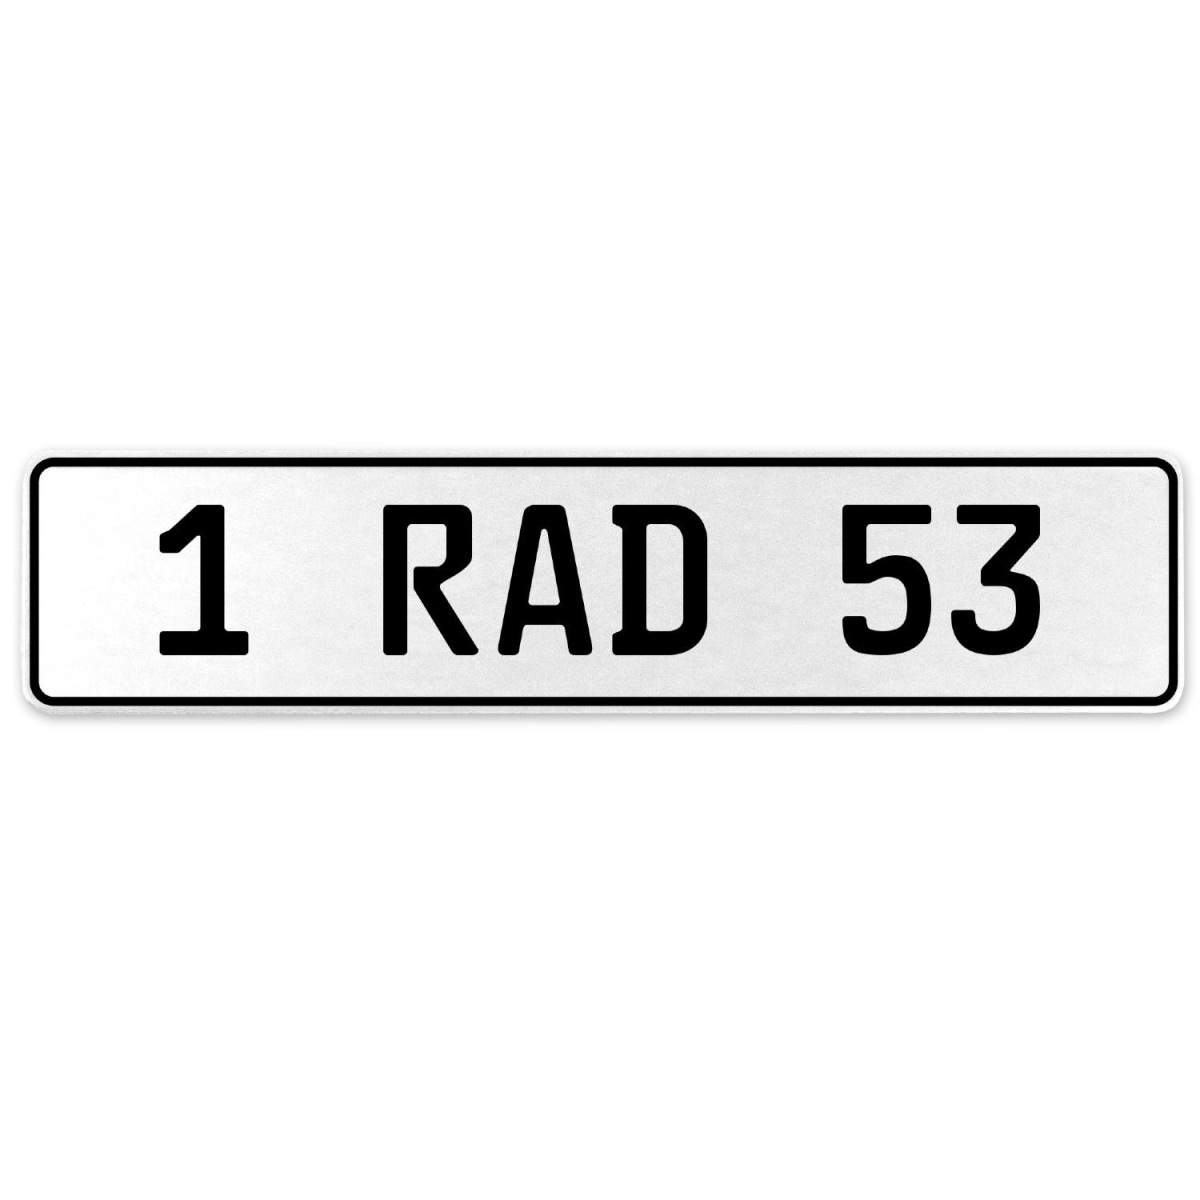 554056 1 Rad 53 - White Aluminum Street Sign Mancave Euro Plate Name Door Sign Wall